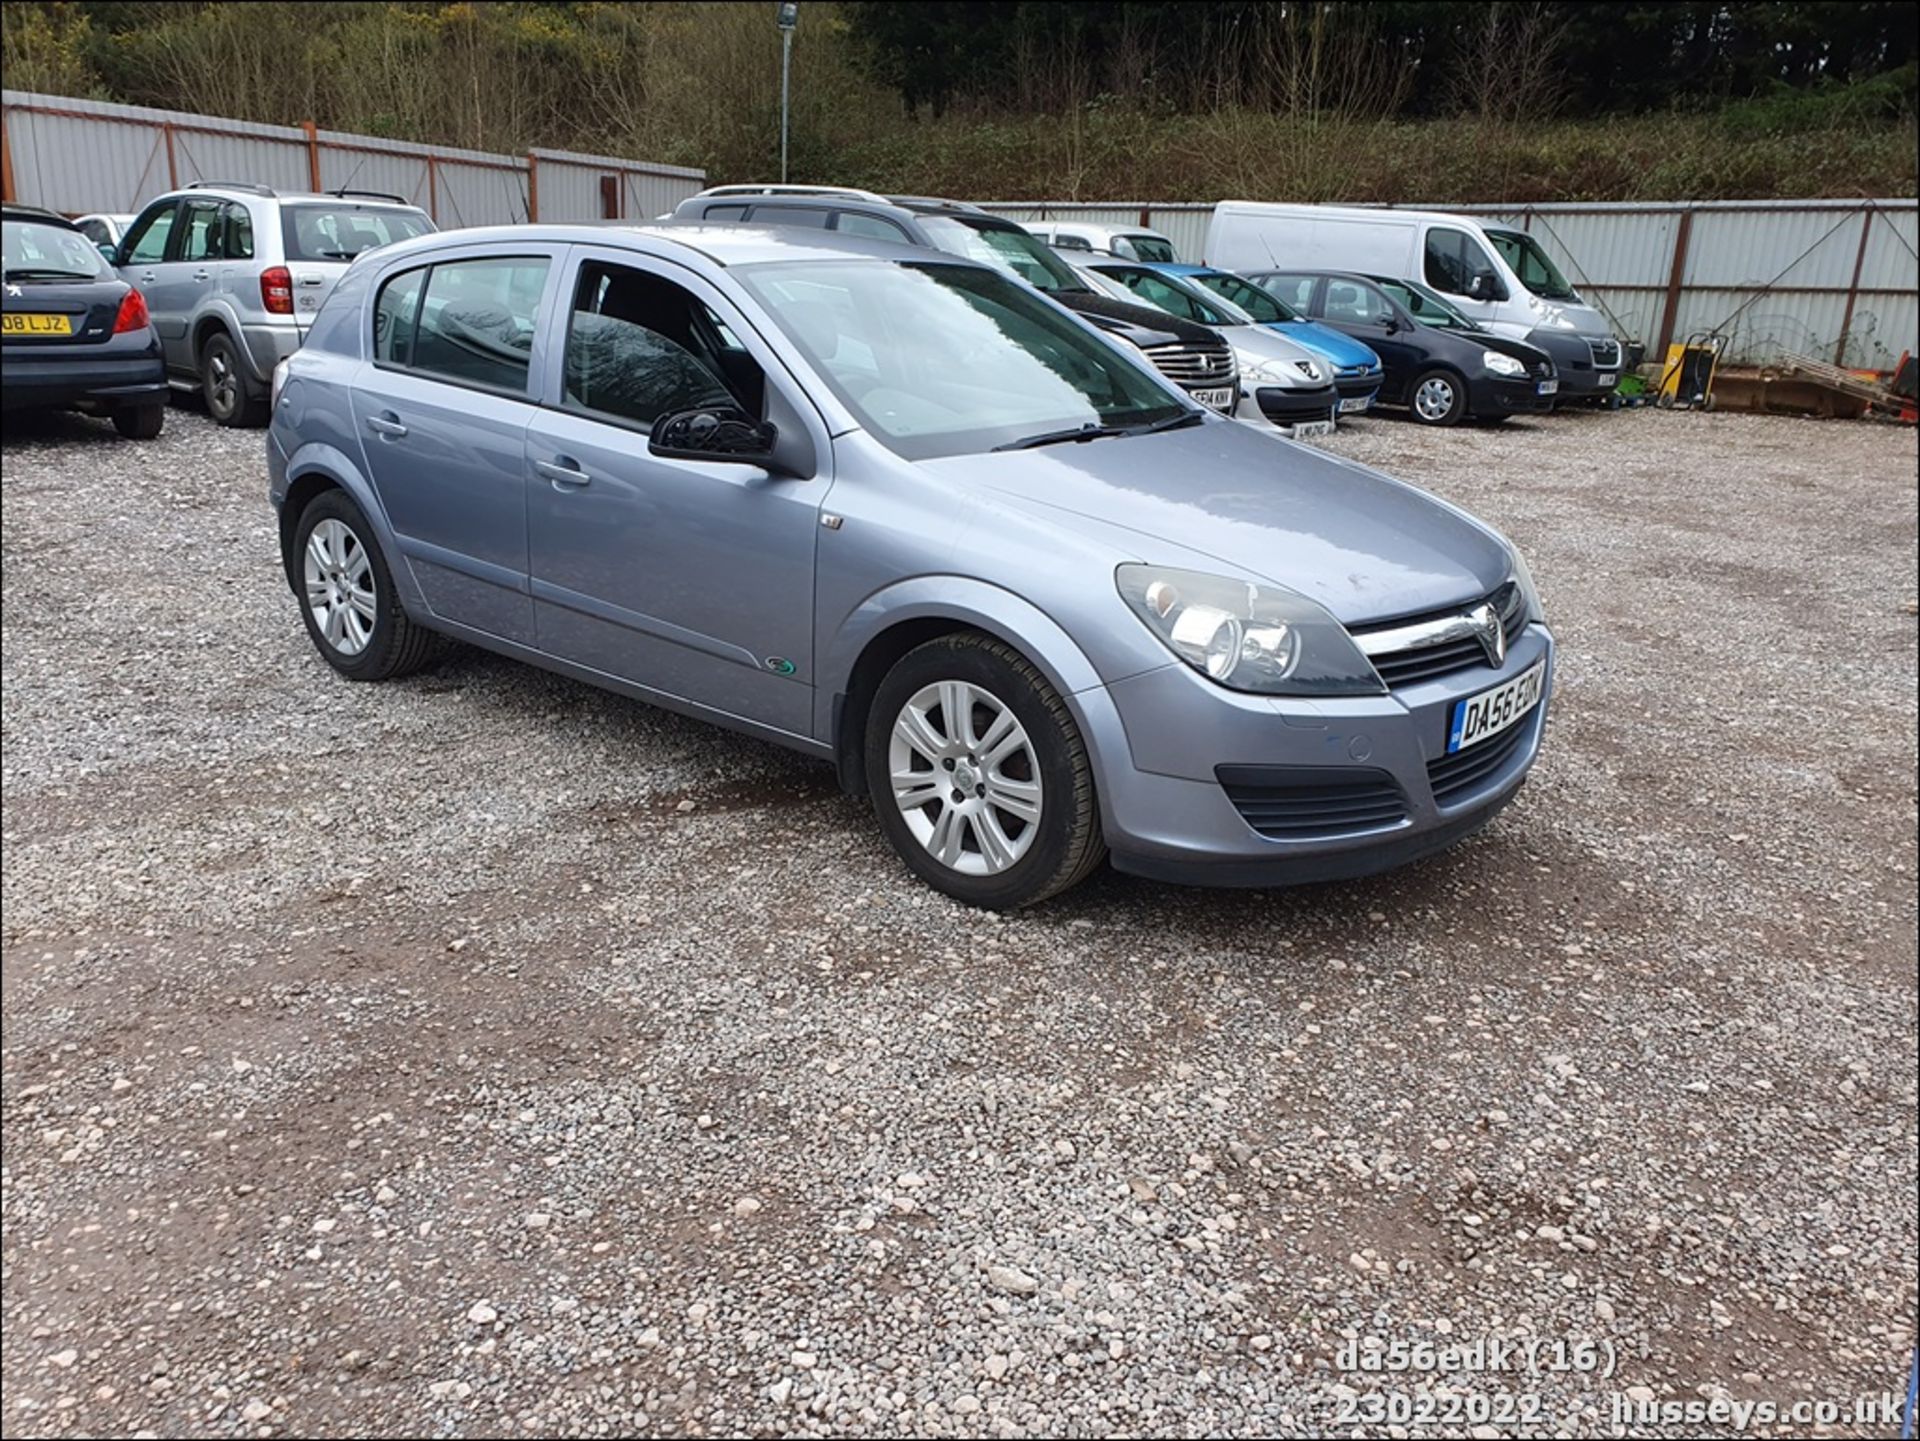 06/56 VAUXHALL ASTRA ACTIVE - 1598cc 5dr Hatchback (Silver) - Image 15 of 42